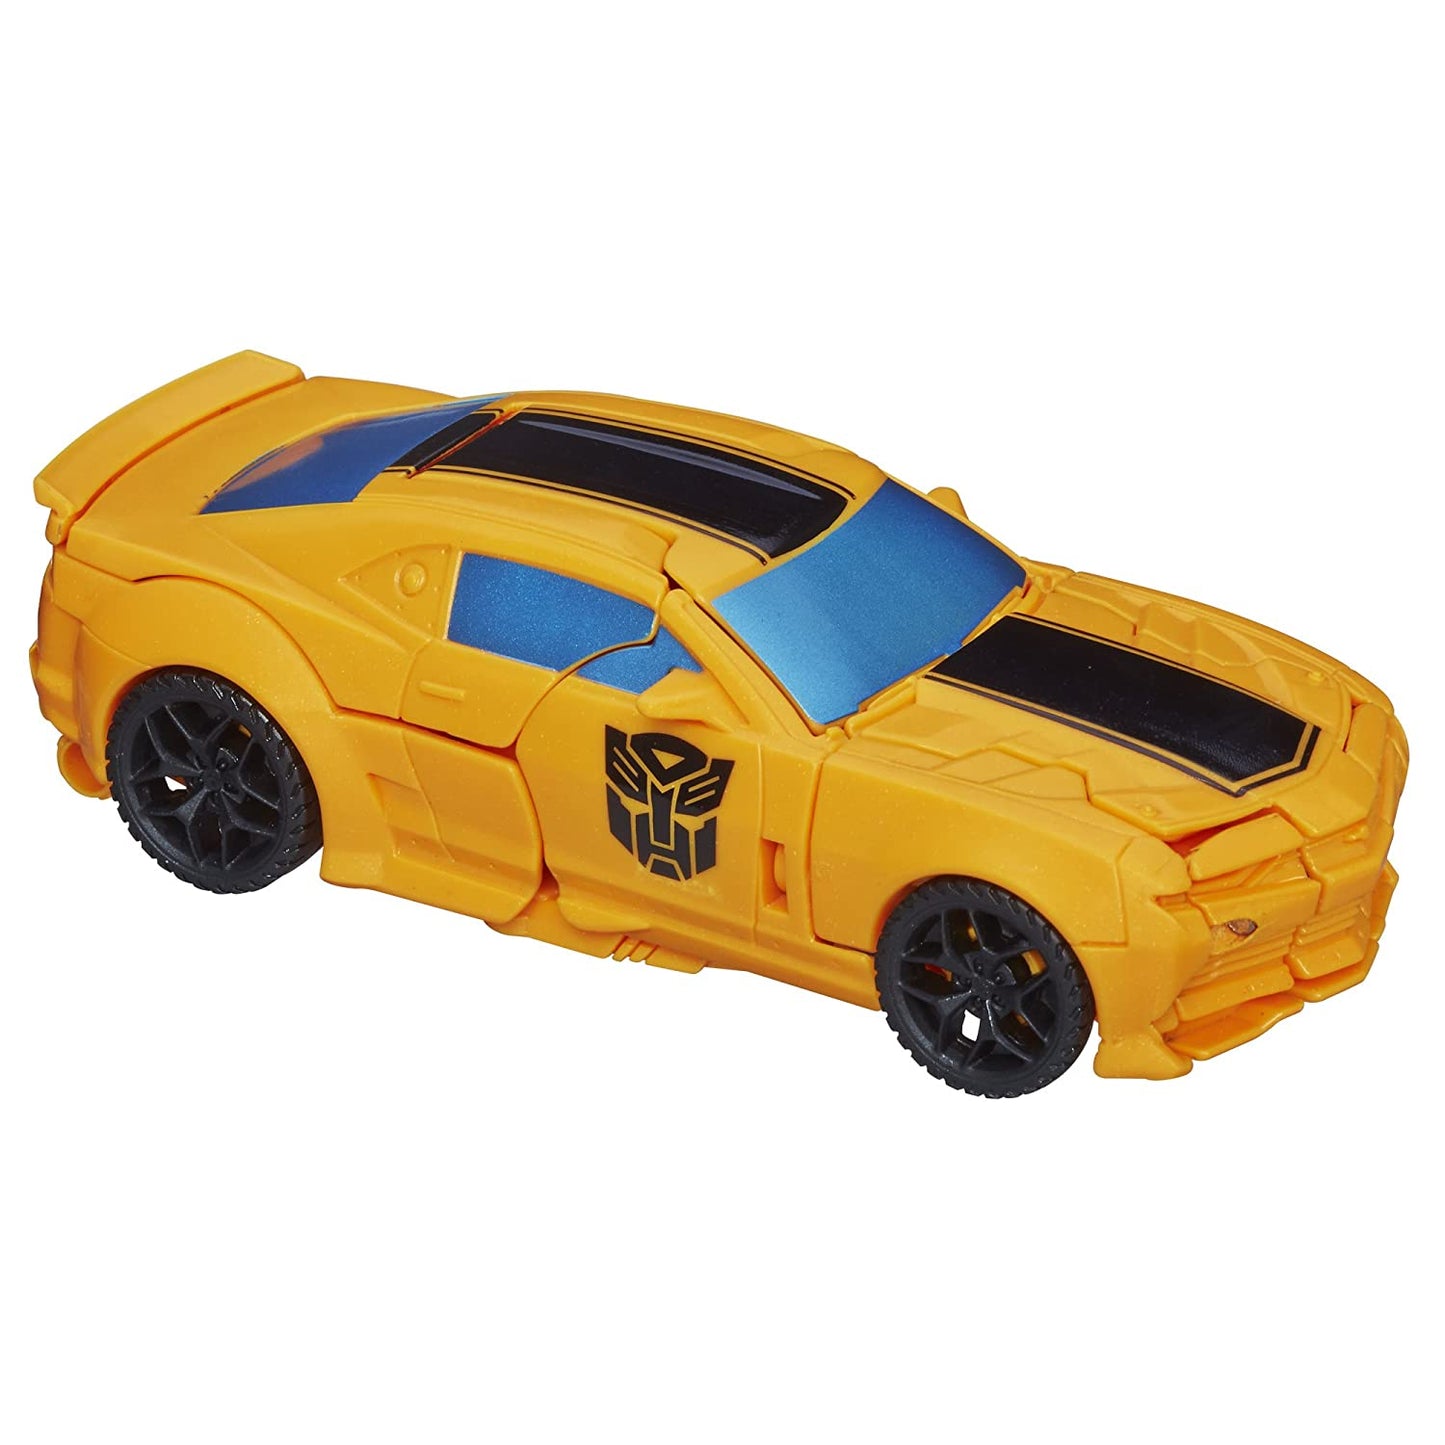 Hasbro Genuine Transformers Toys Bumblebee Autobot Action Figure Deformation Robot Toys For Boys Kids Birthday Gift - samstoy.in